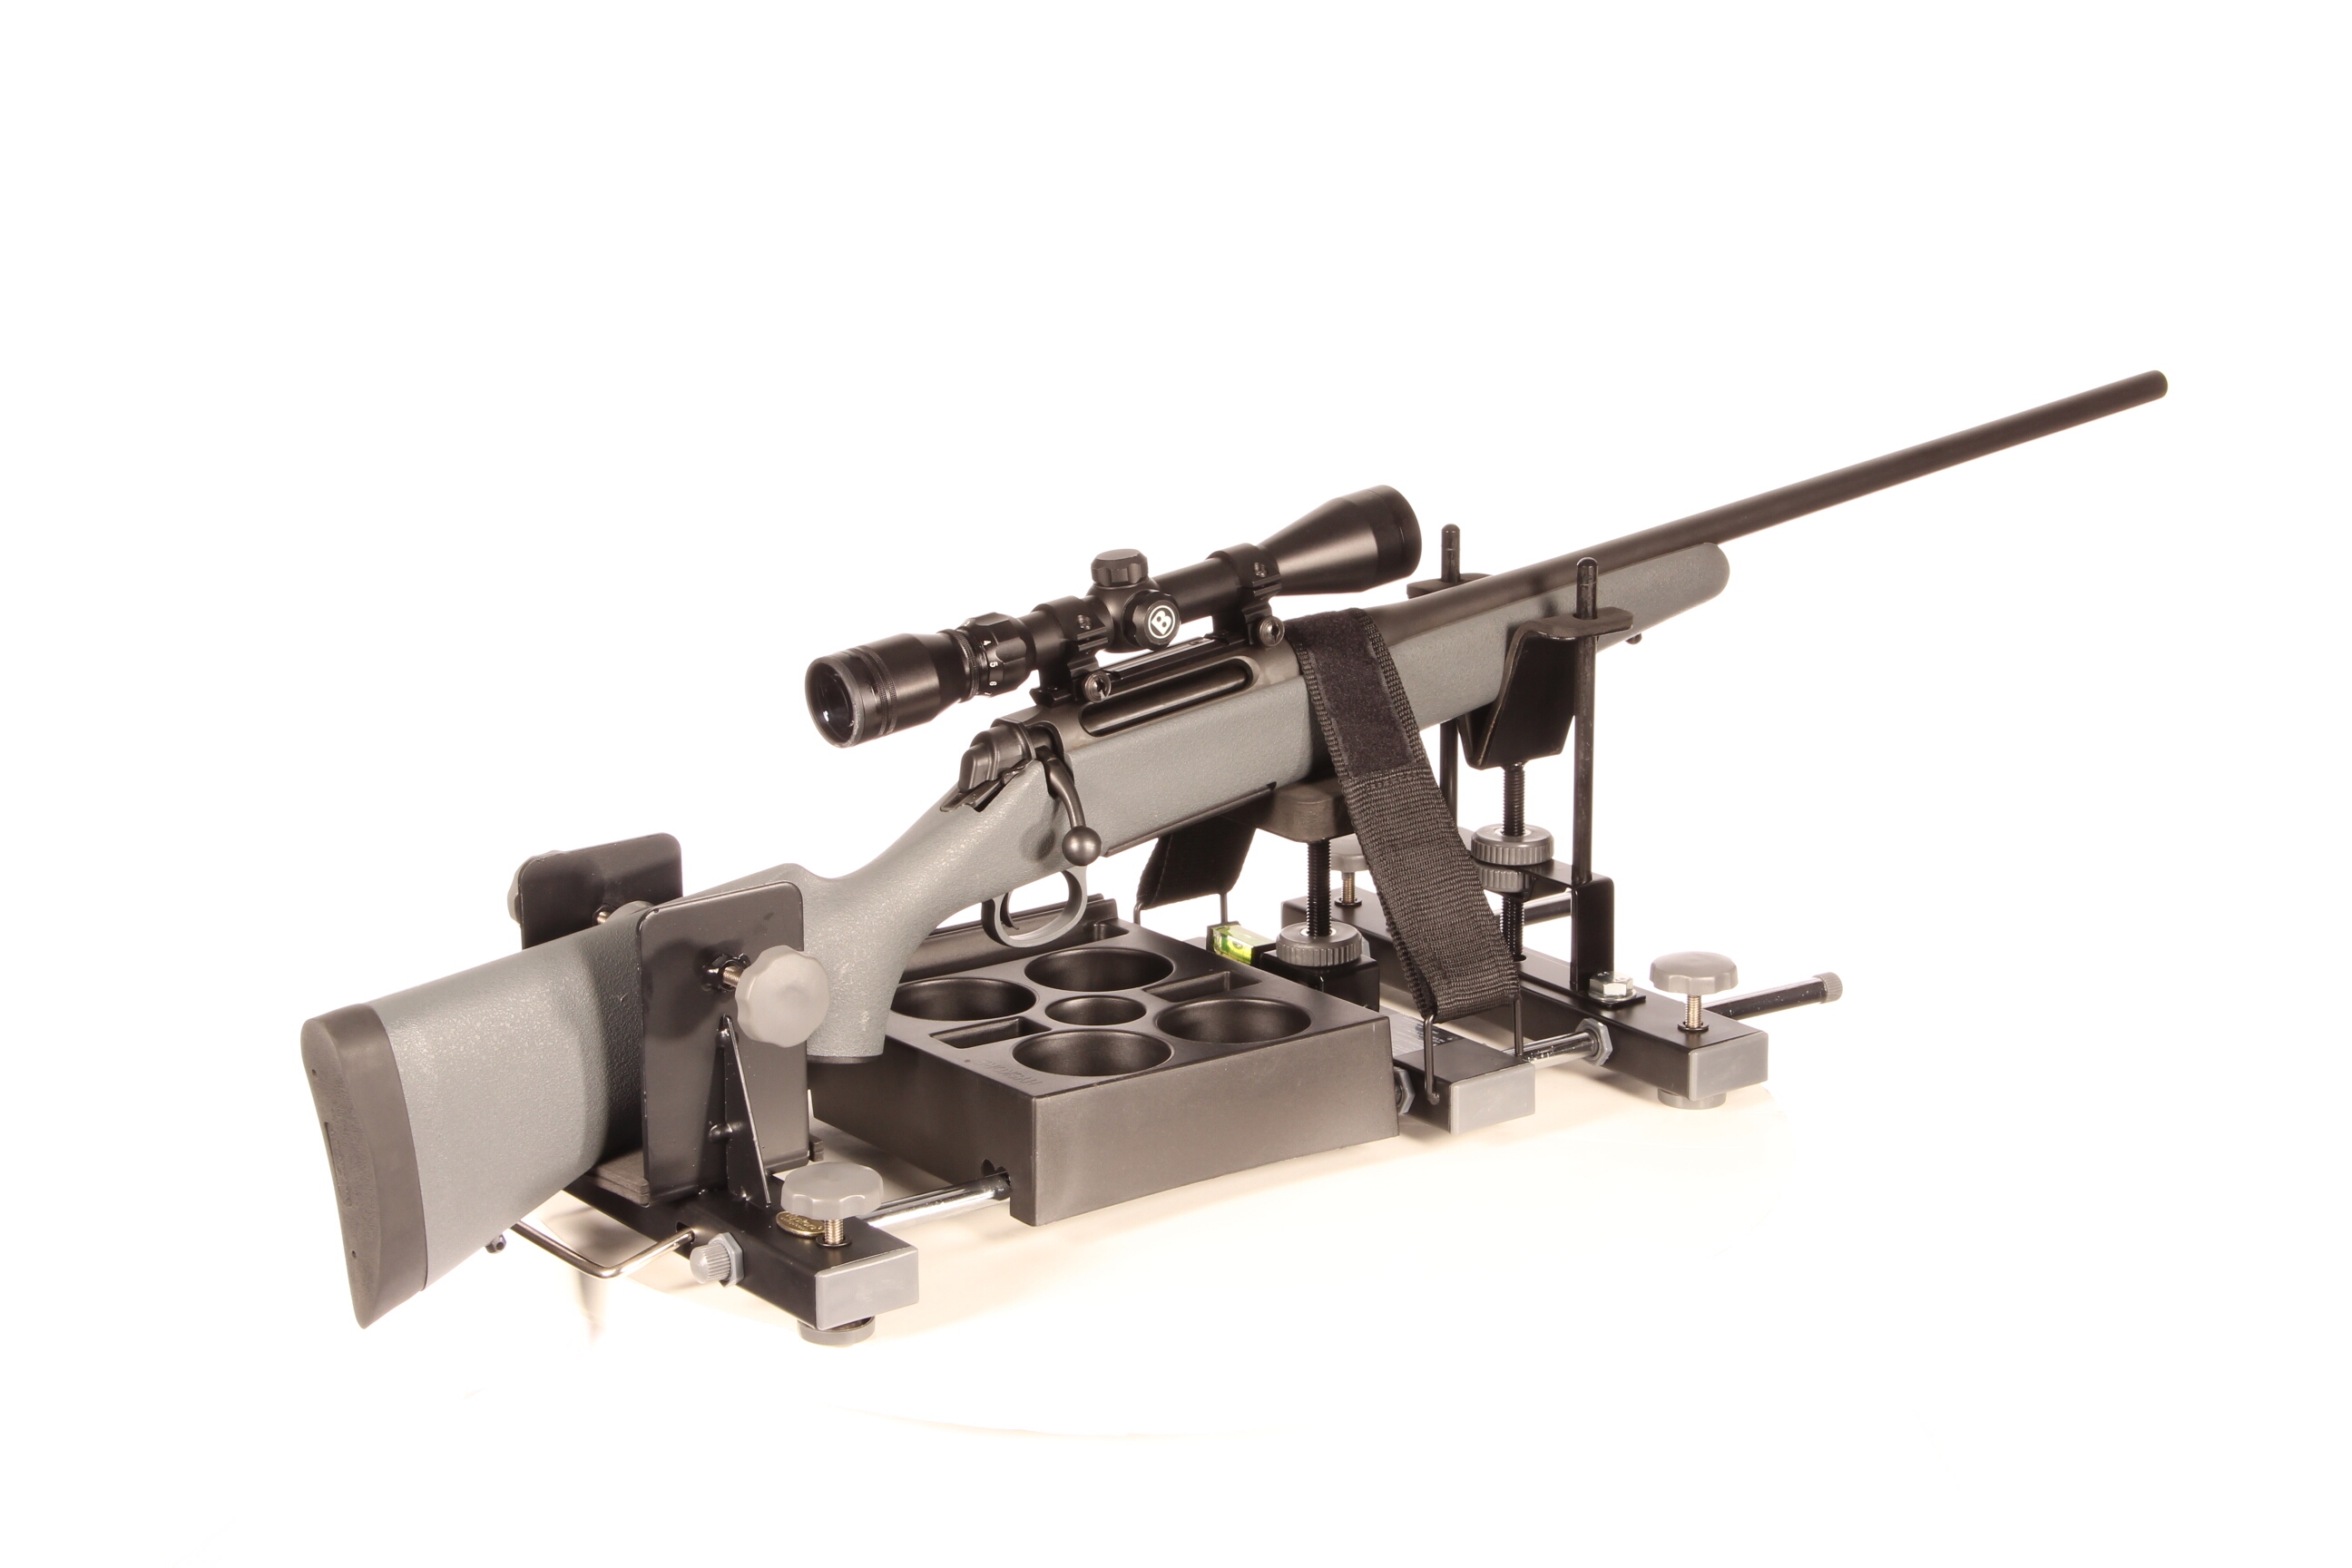 Fascination About Rifle Cleaning Supplies - Bore Tech